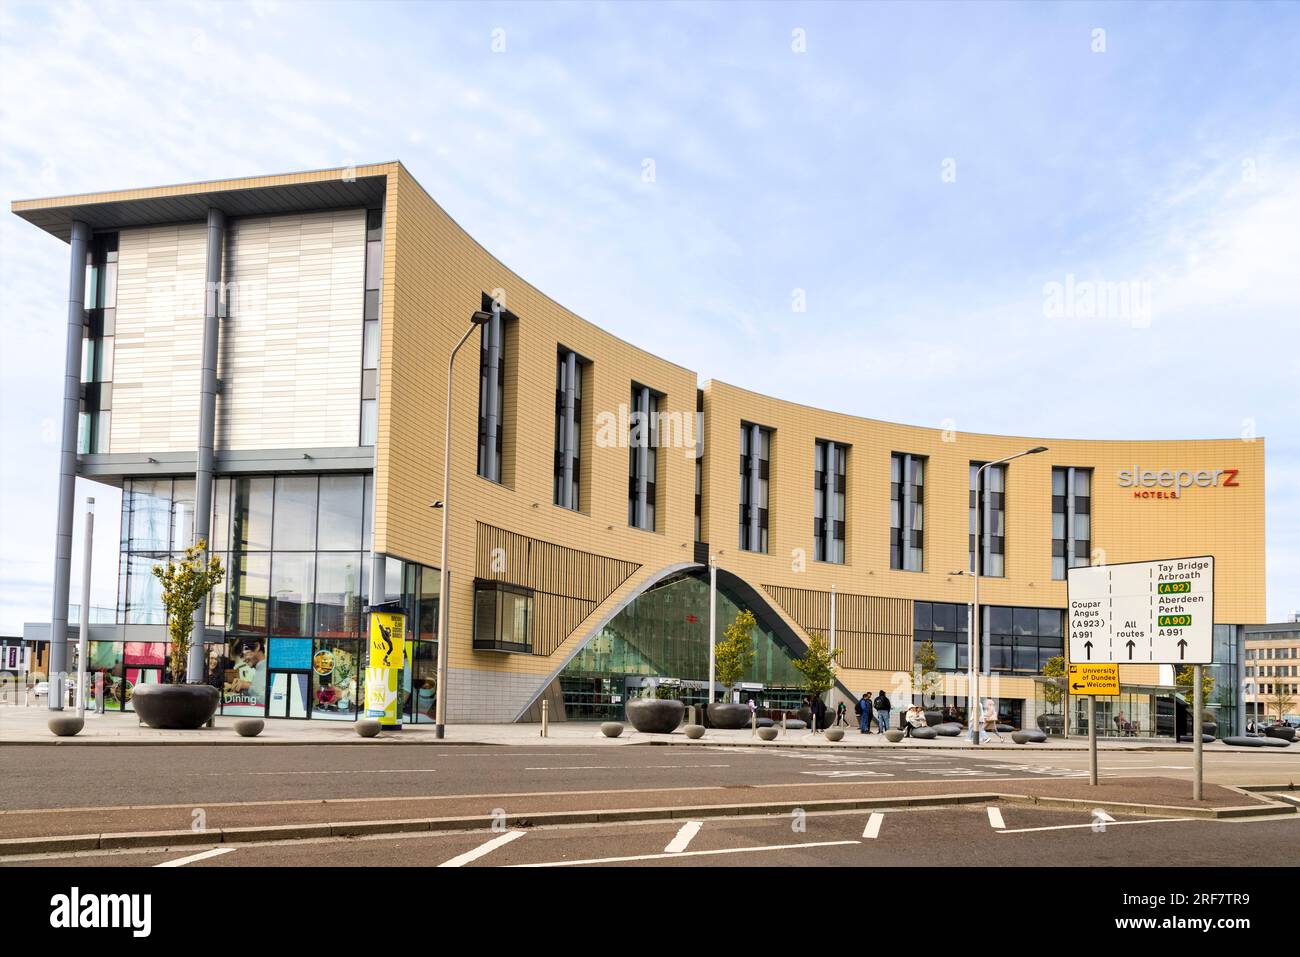 17 September 2022: Dundee, Scotland - The railway station and the SleeperZ Hotel, which was built in 2018 and replaced the old station as part of the Stock Photo